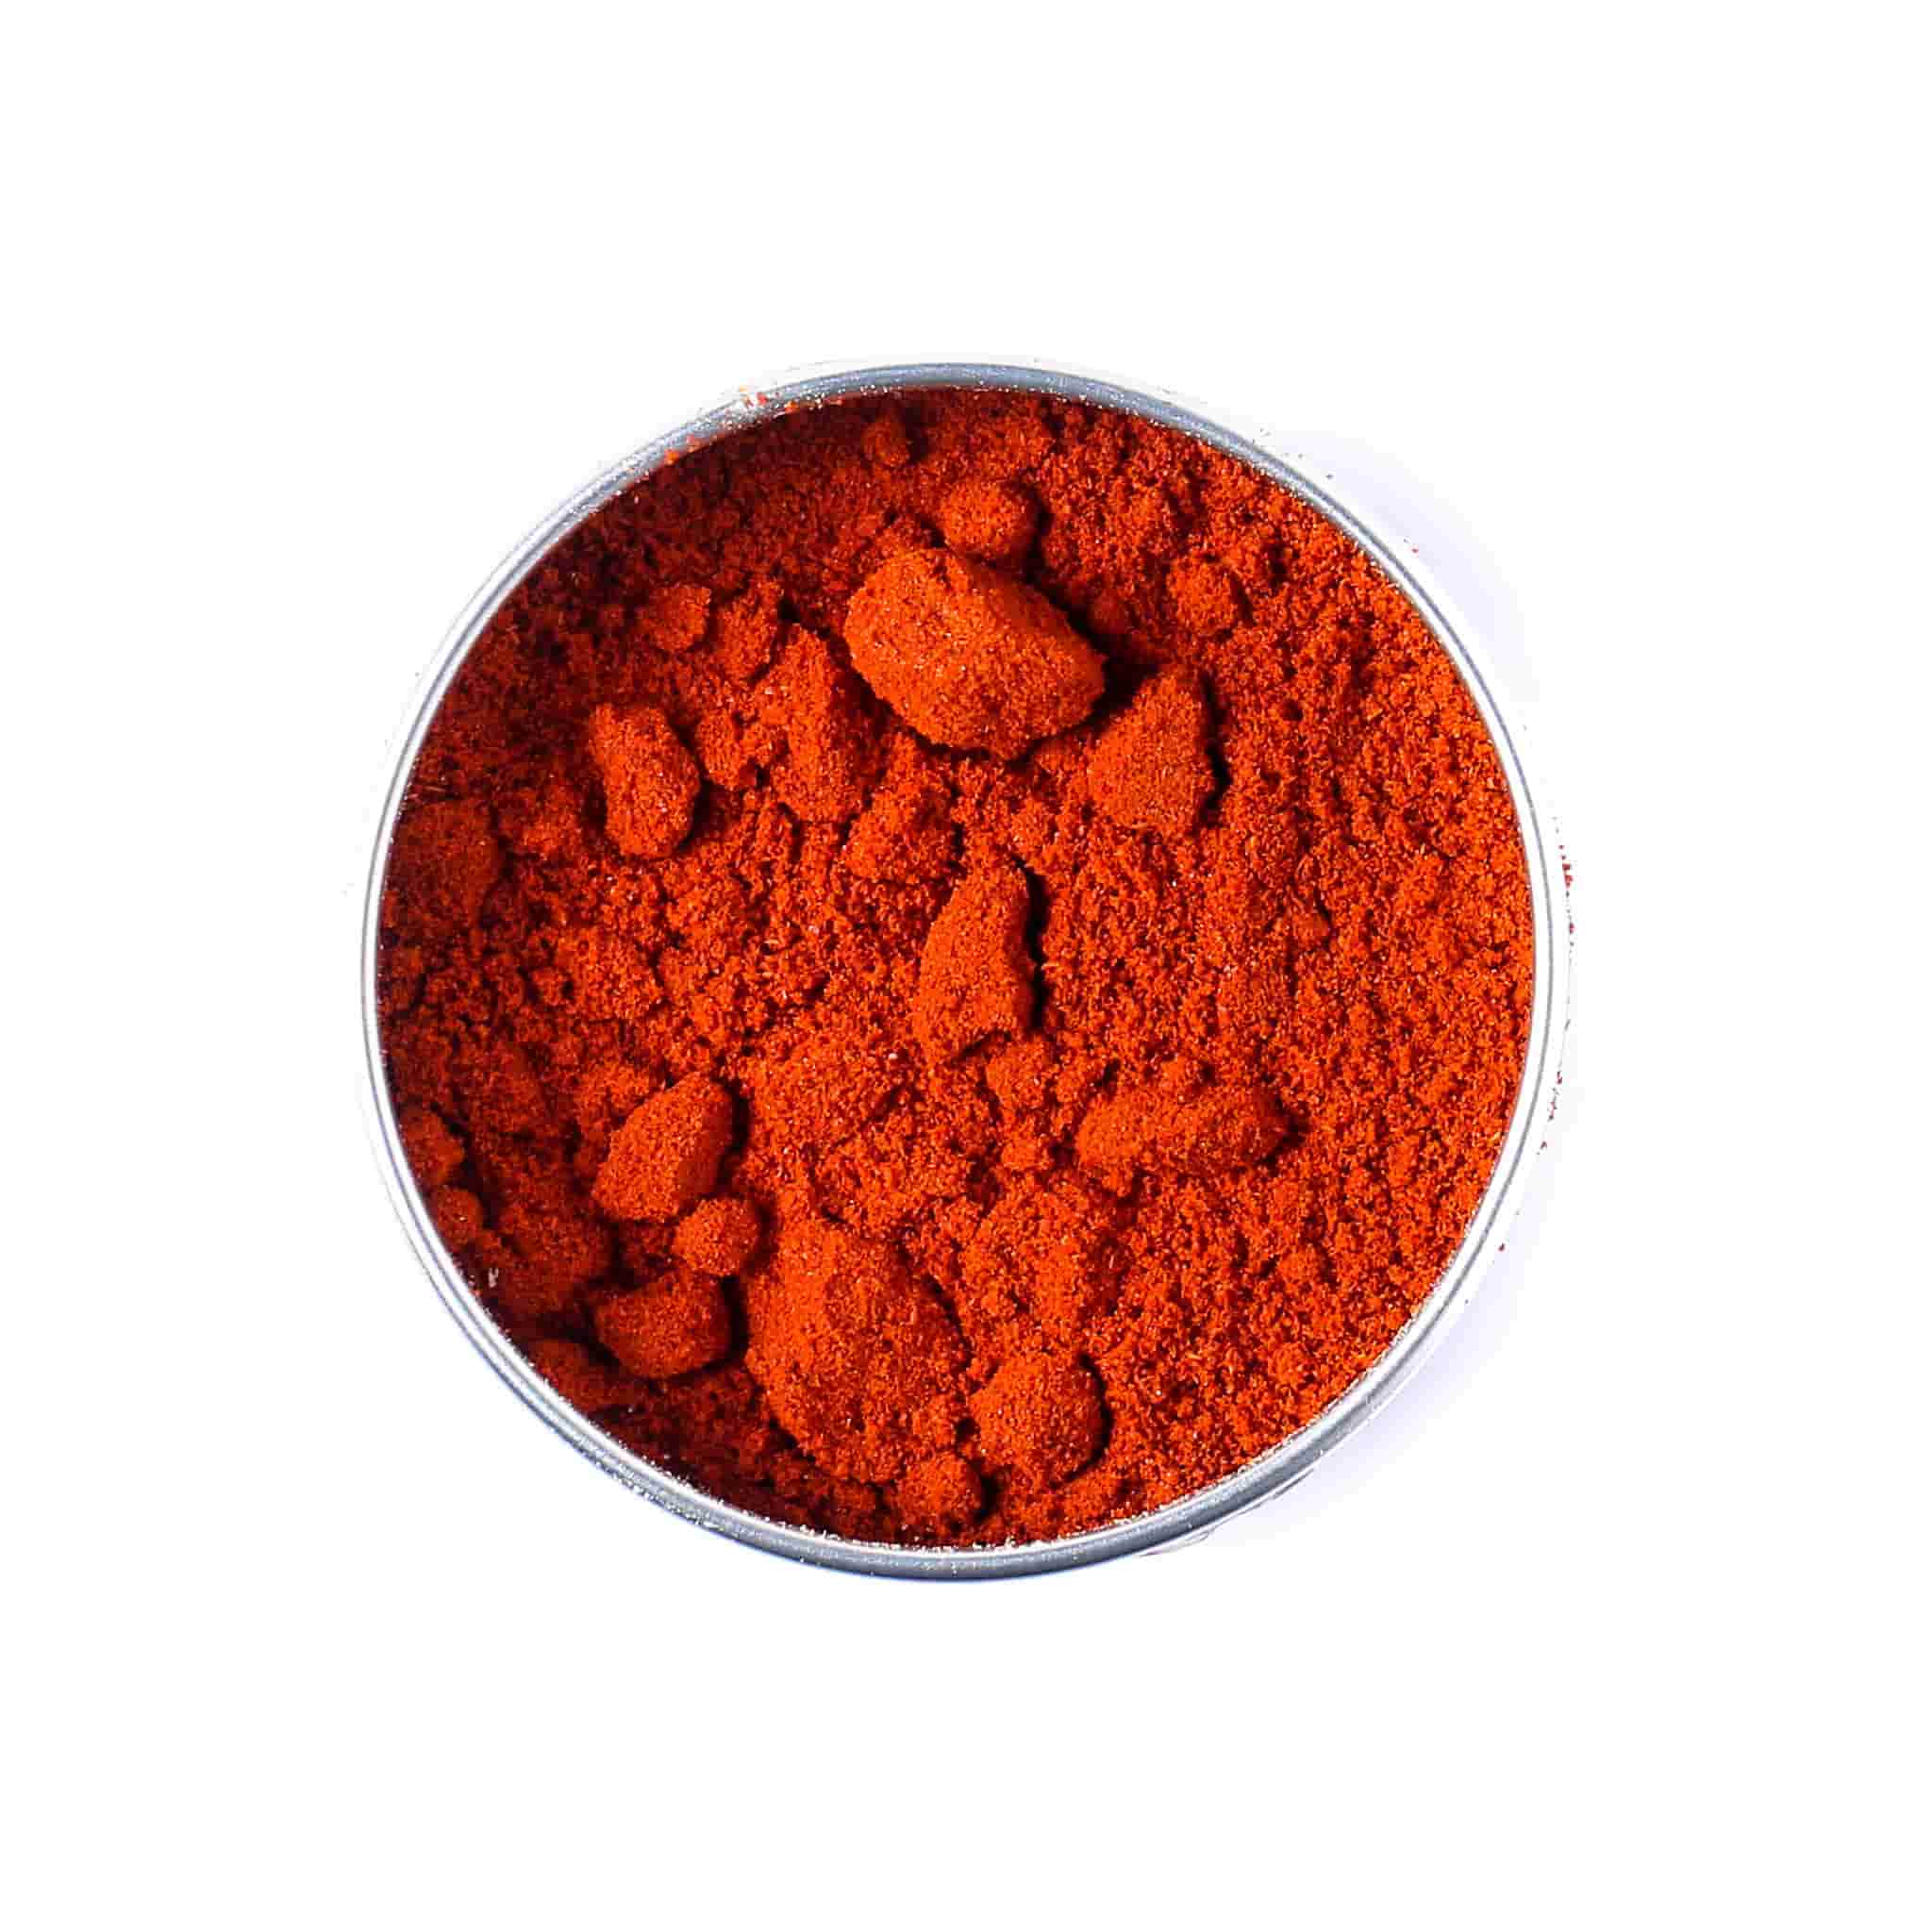 Terre Exotique Smoked Paprika 60g product